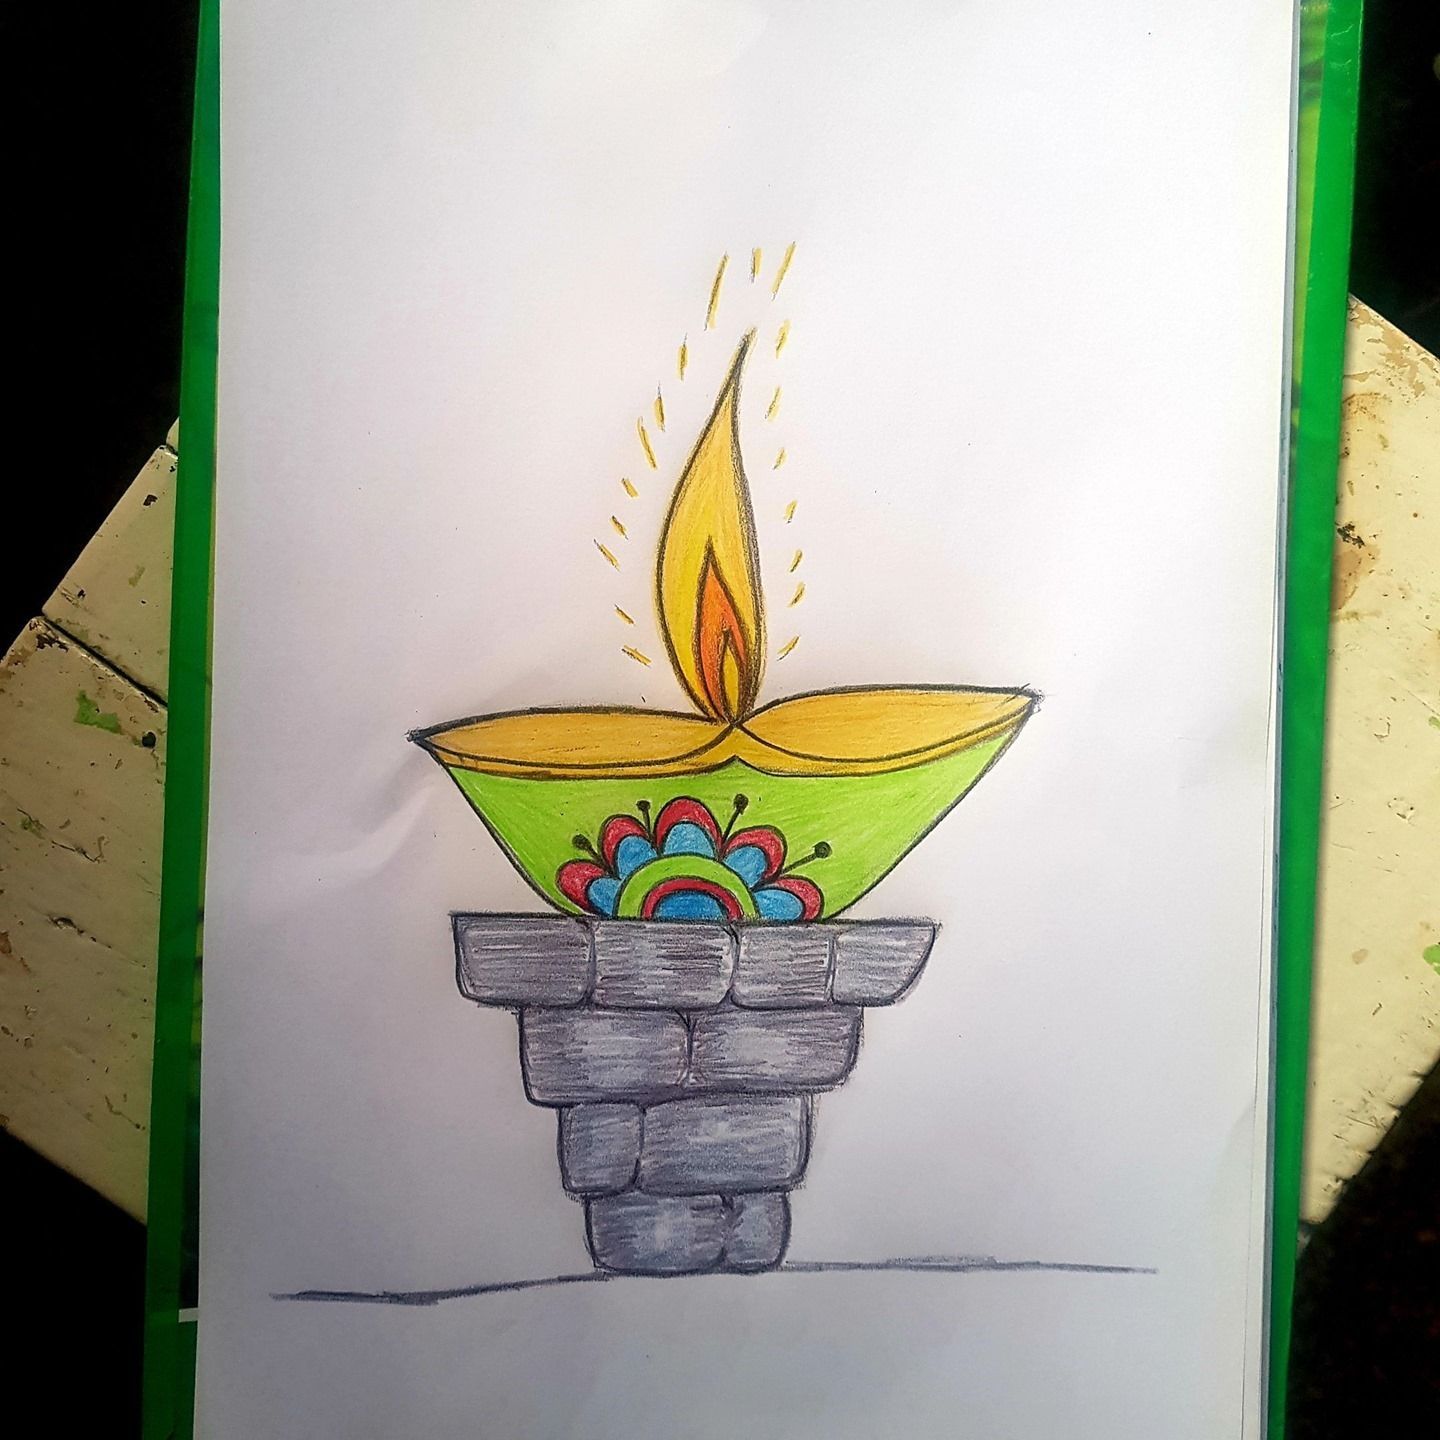 How to Draw Diwali Festival Drawing । Night Sky Lantern Scenery । Oil  Pastels Drawing for Beginners - Yo… | Diwali painting, Diwali festival  drawing, Diwali drawing